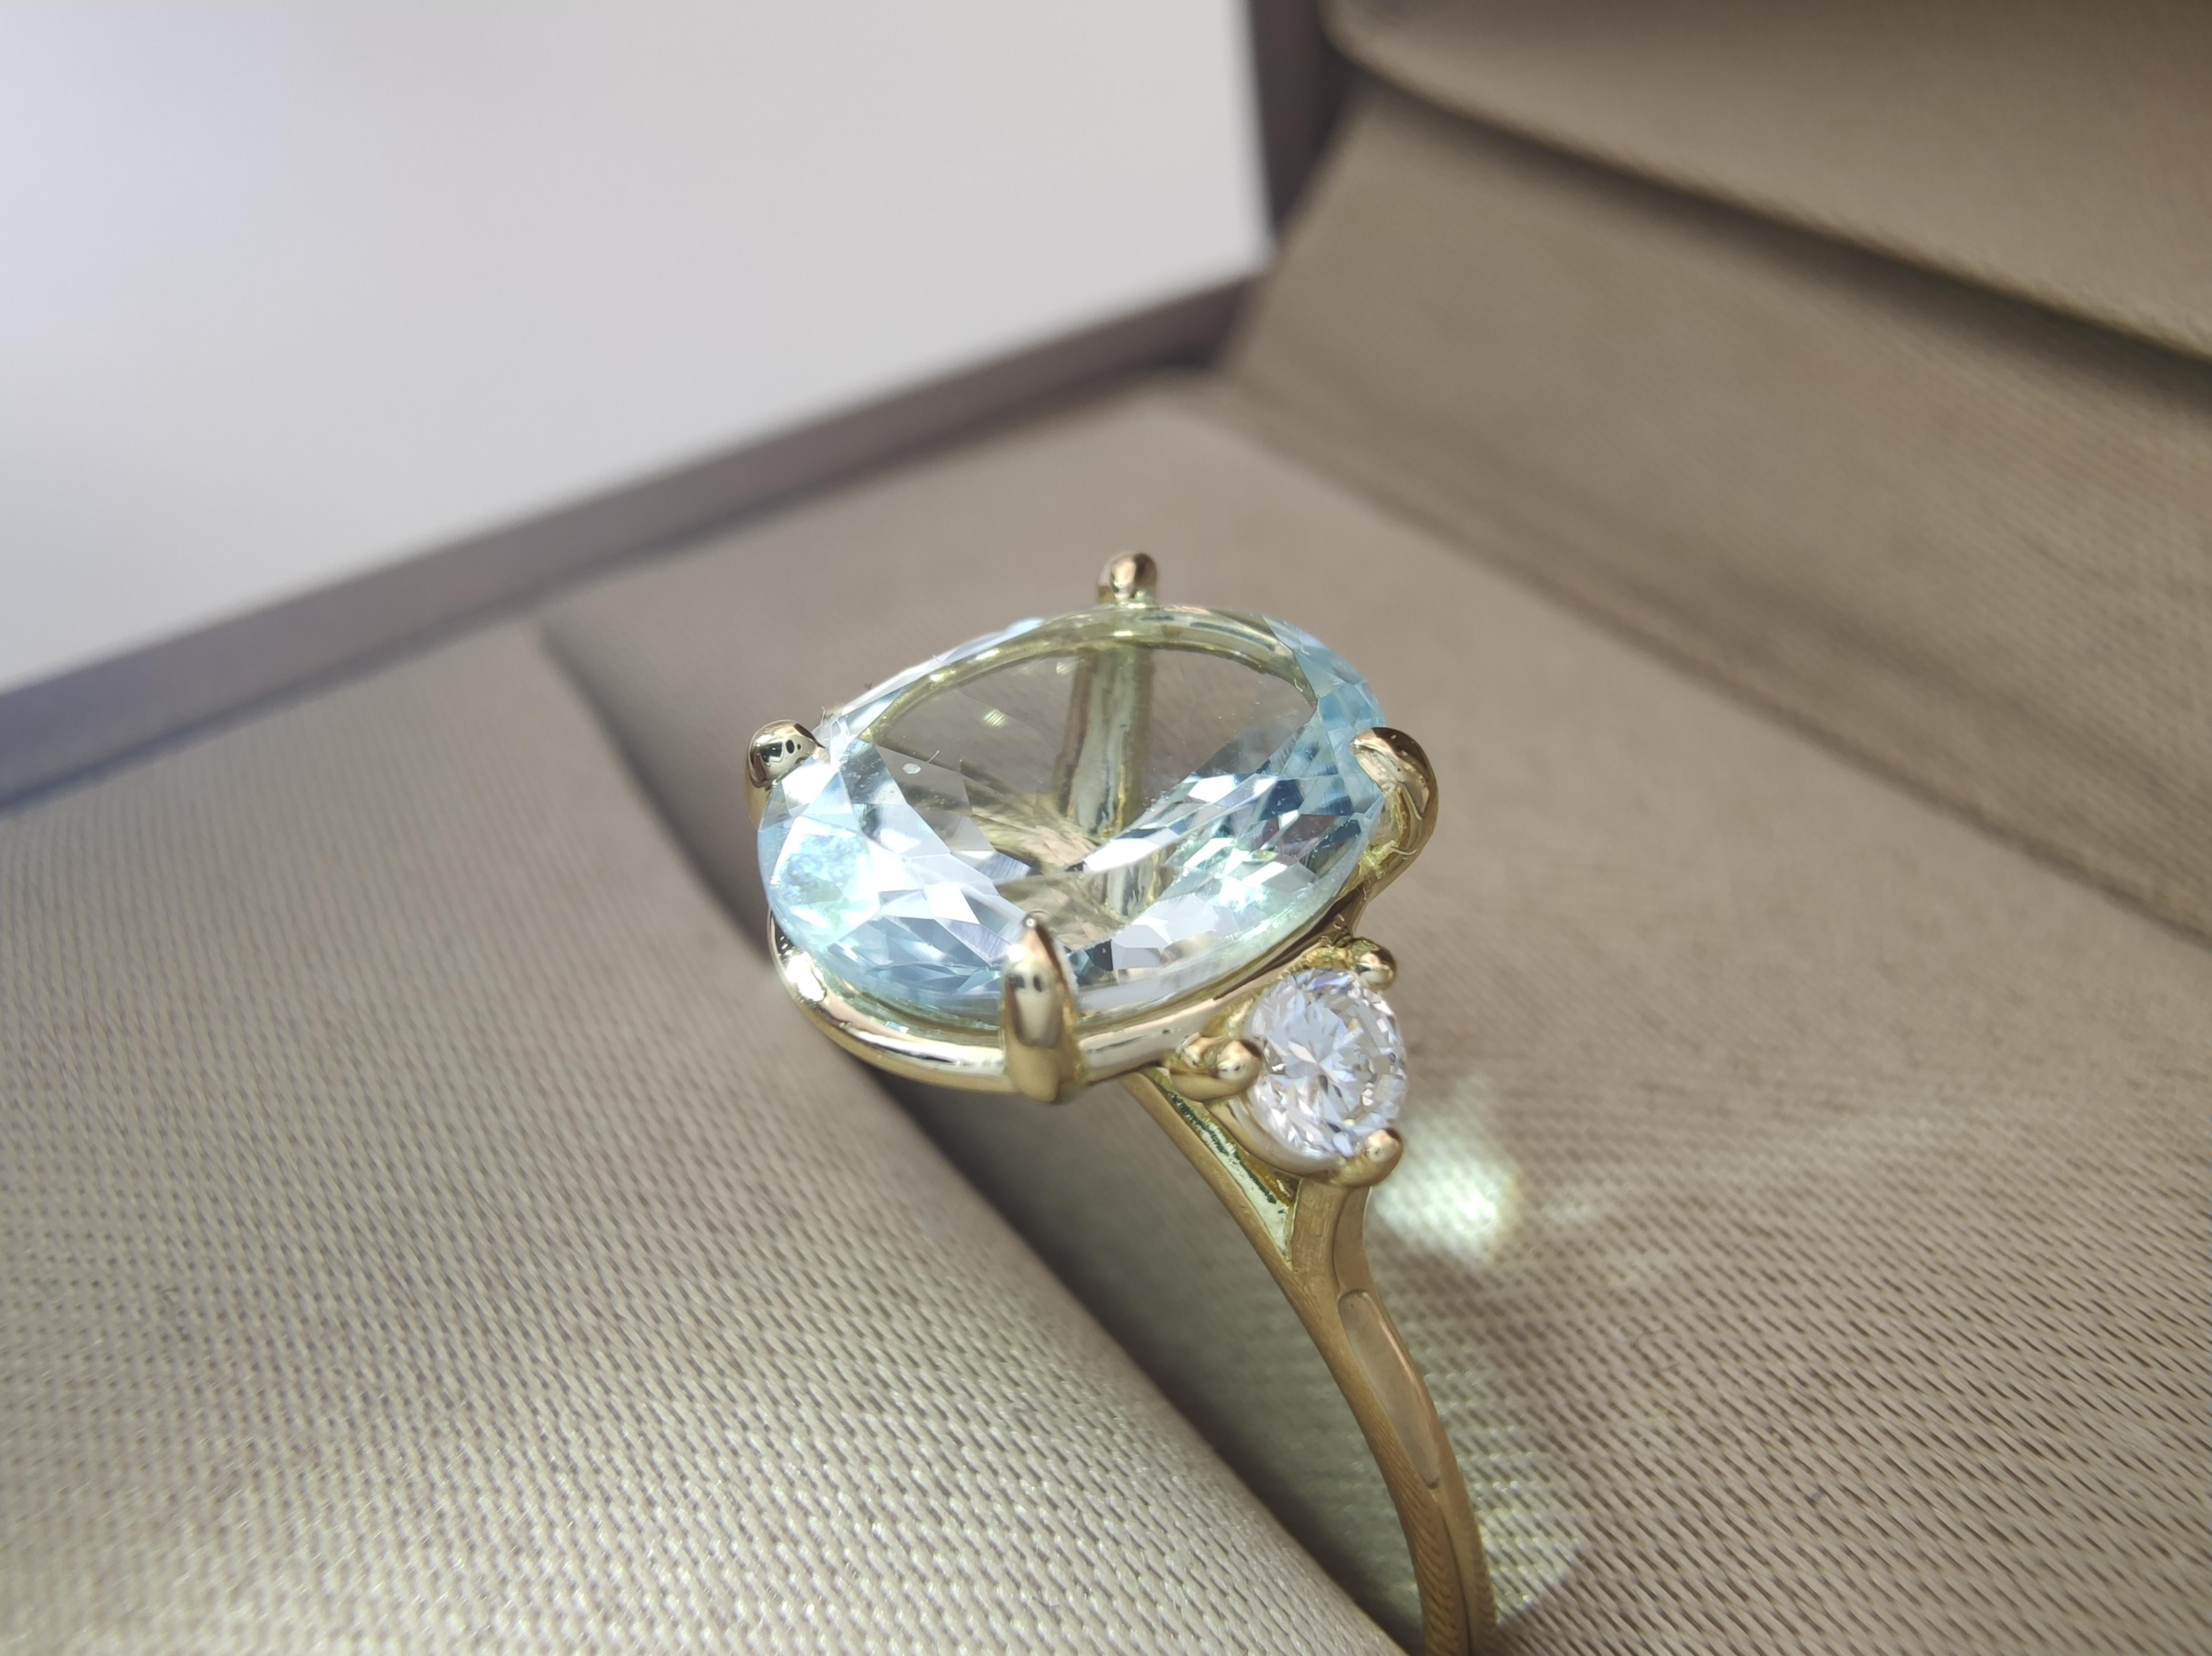 -Perfect for daily wear, this 18K Yellow Gold Aquamarine & Two Diamonds Women's Ring adds elegance to every moment.

Discover timeless elegance with our meticulously crafted 18K yellow gold women's ring featuring a captivating aquamarine centerpiece